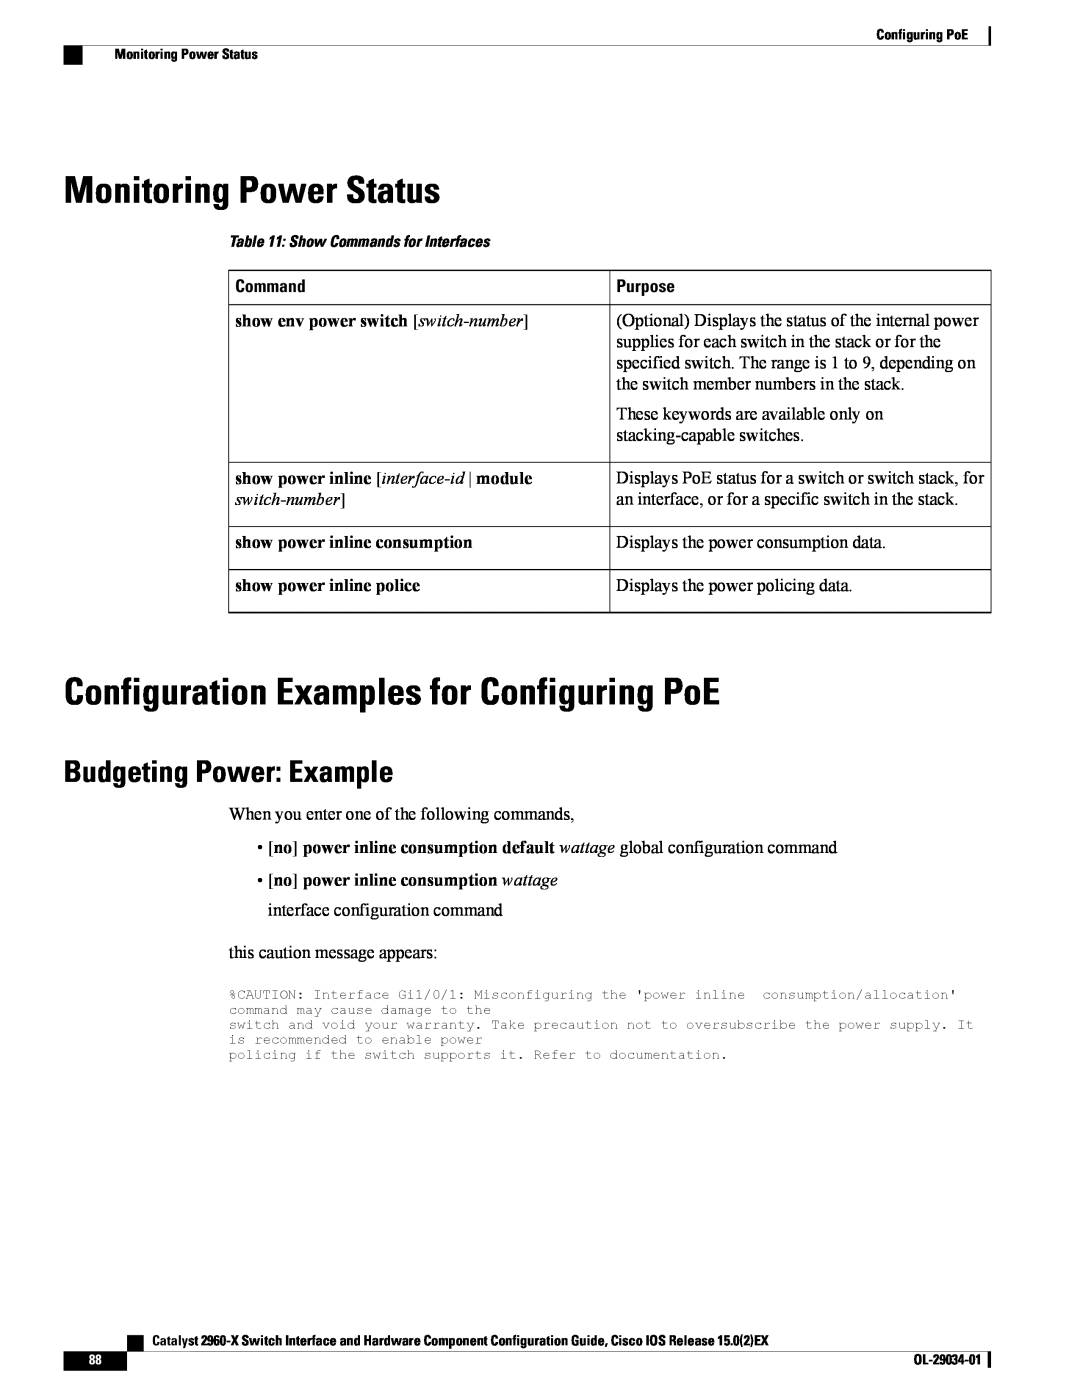 Cisco Systems WSC2960X48TDL Monitoring Power Status, Configuration Examples for Configuring PoE, Budgeting Power Example 